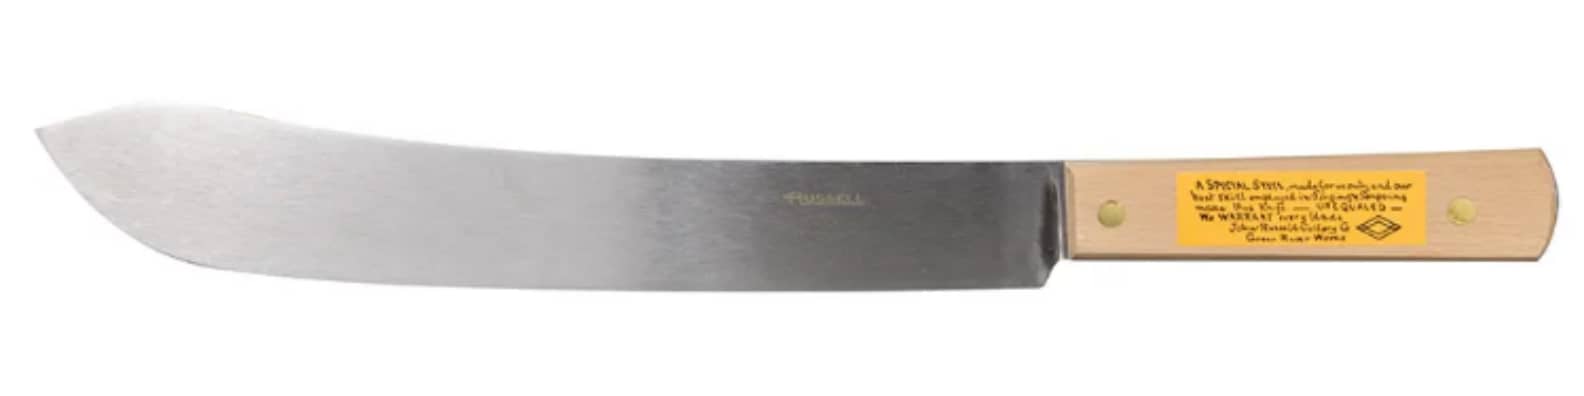 The traditional Butcher Knife